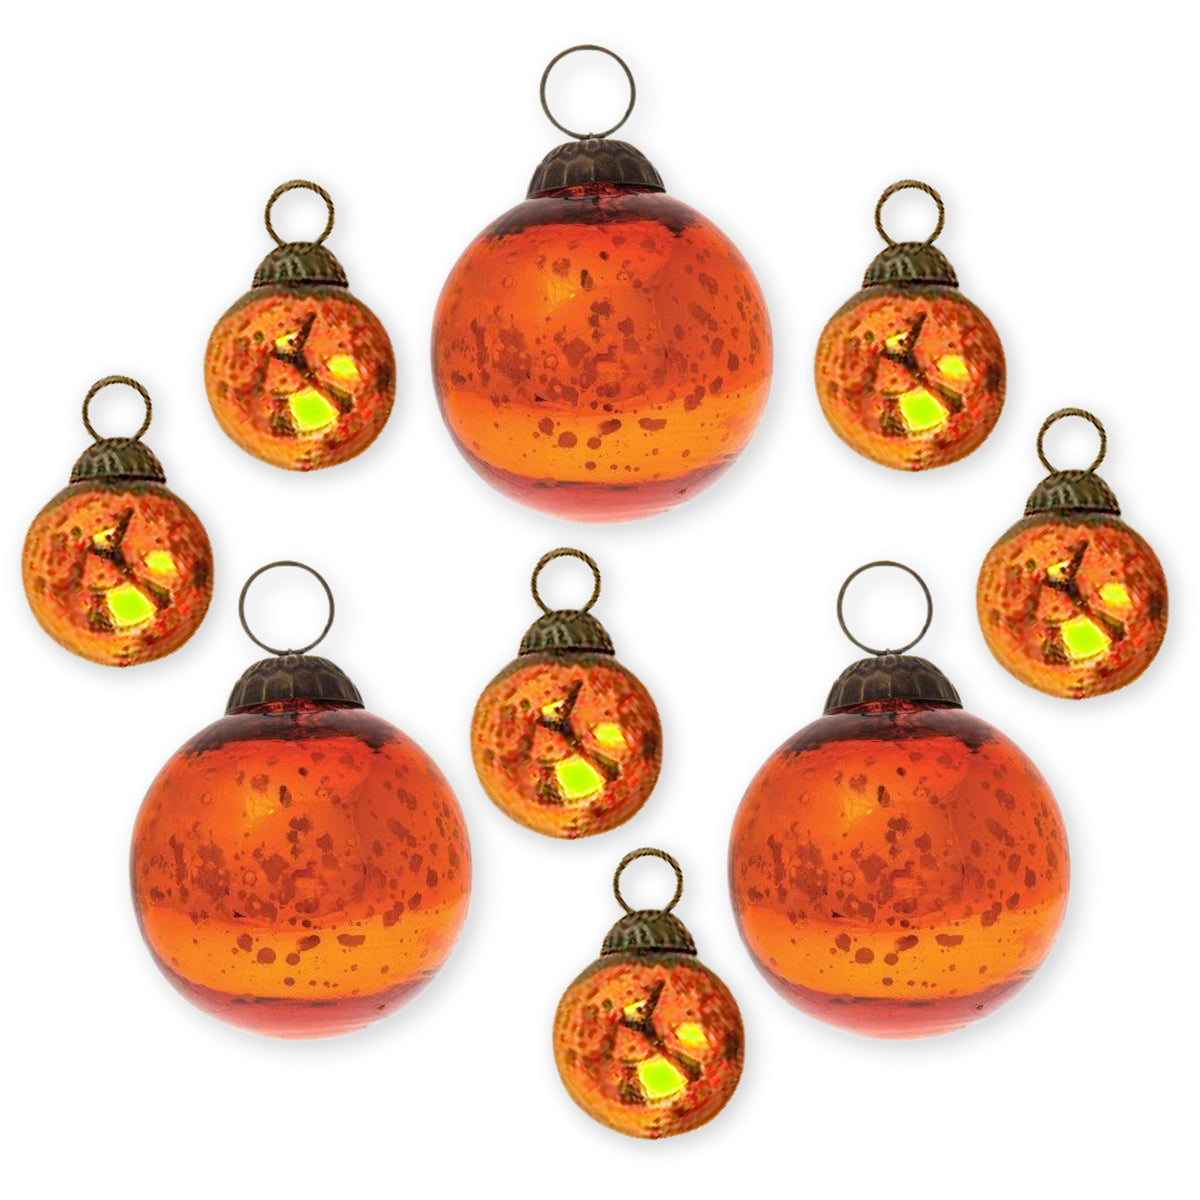 CLOSEOUT 9 PACK | Ava Orange Vintage Assorted Ornaments Set - Great Gift Idea, Vintage-Style Decorations for Christmas, Special Occasions, Home Decor and Parties - Luna Bazaar | Boho &amp; Vintage Style Decor